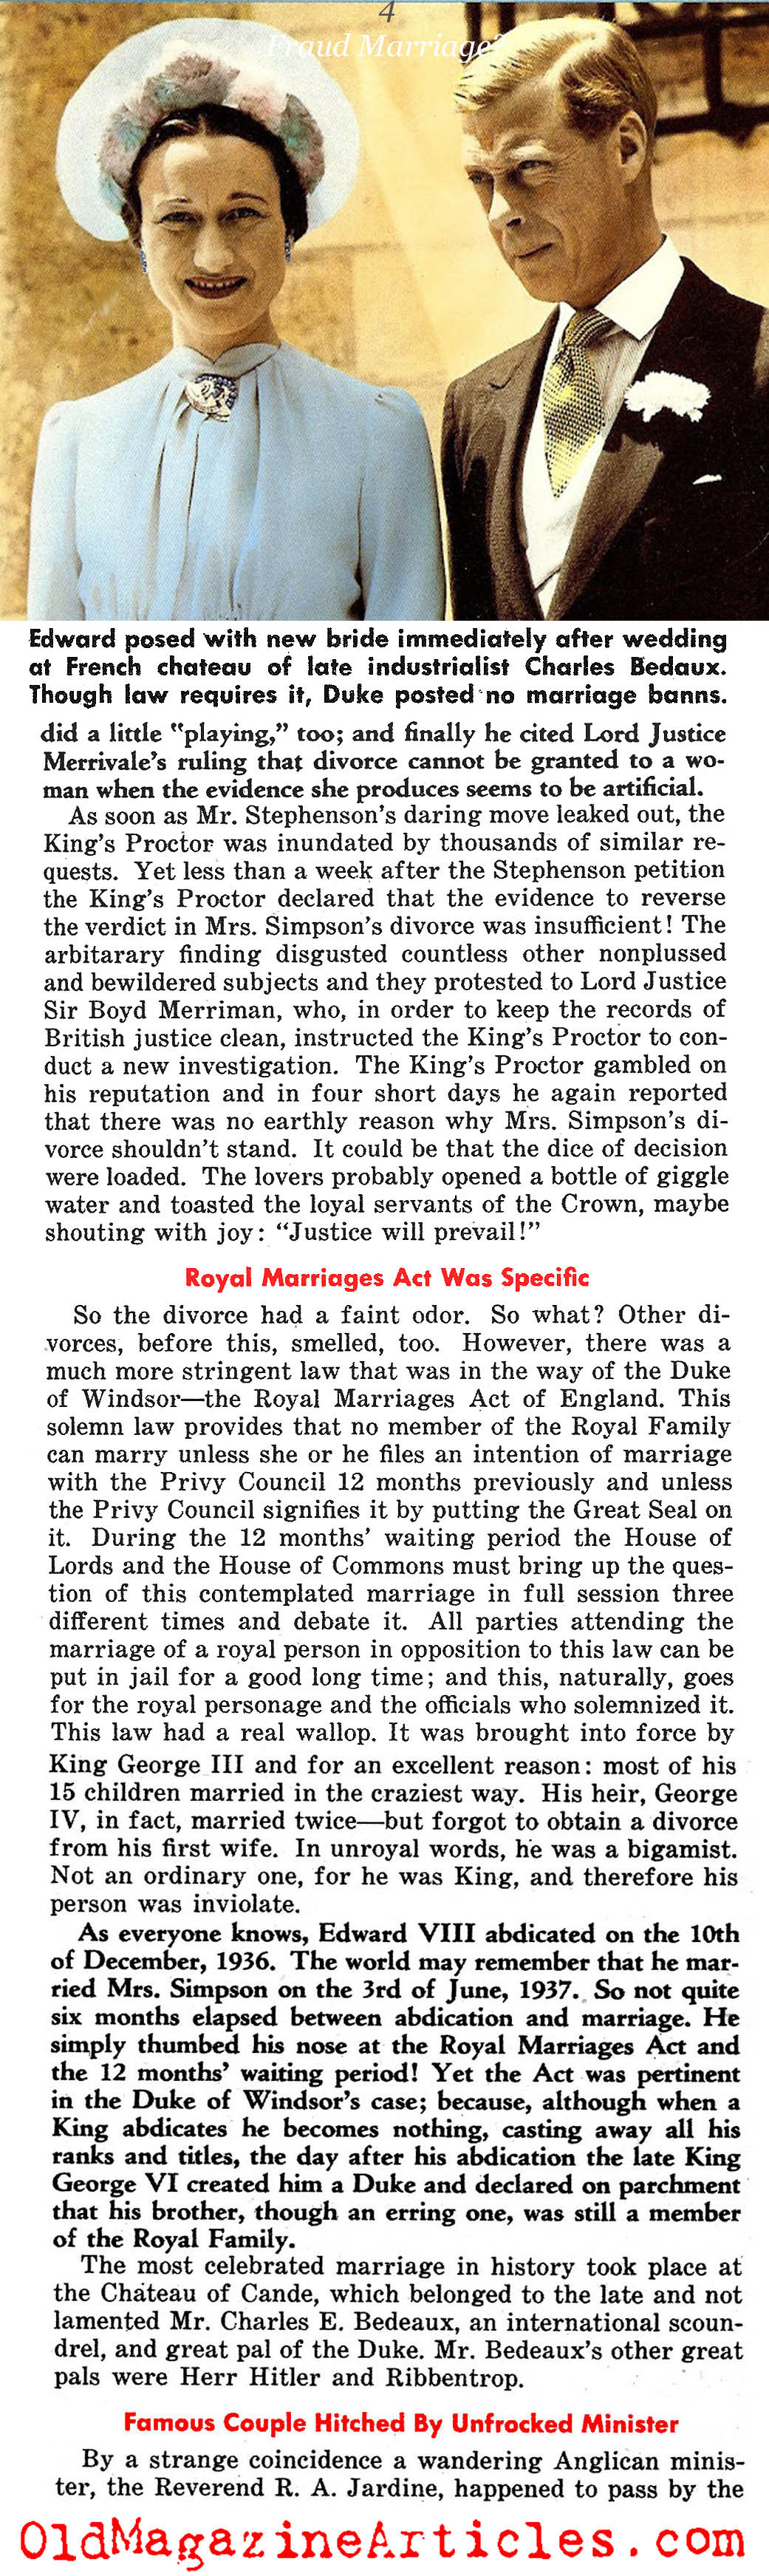 Was The Windsor Marriage Legal? (Confidential Magazine, 1954)